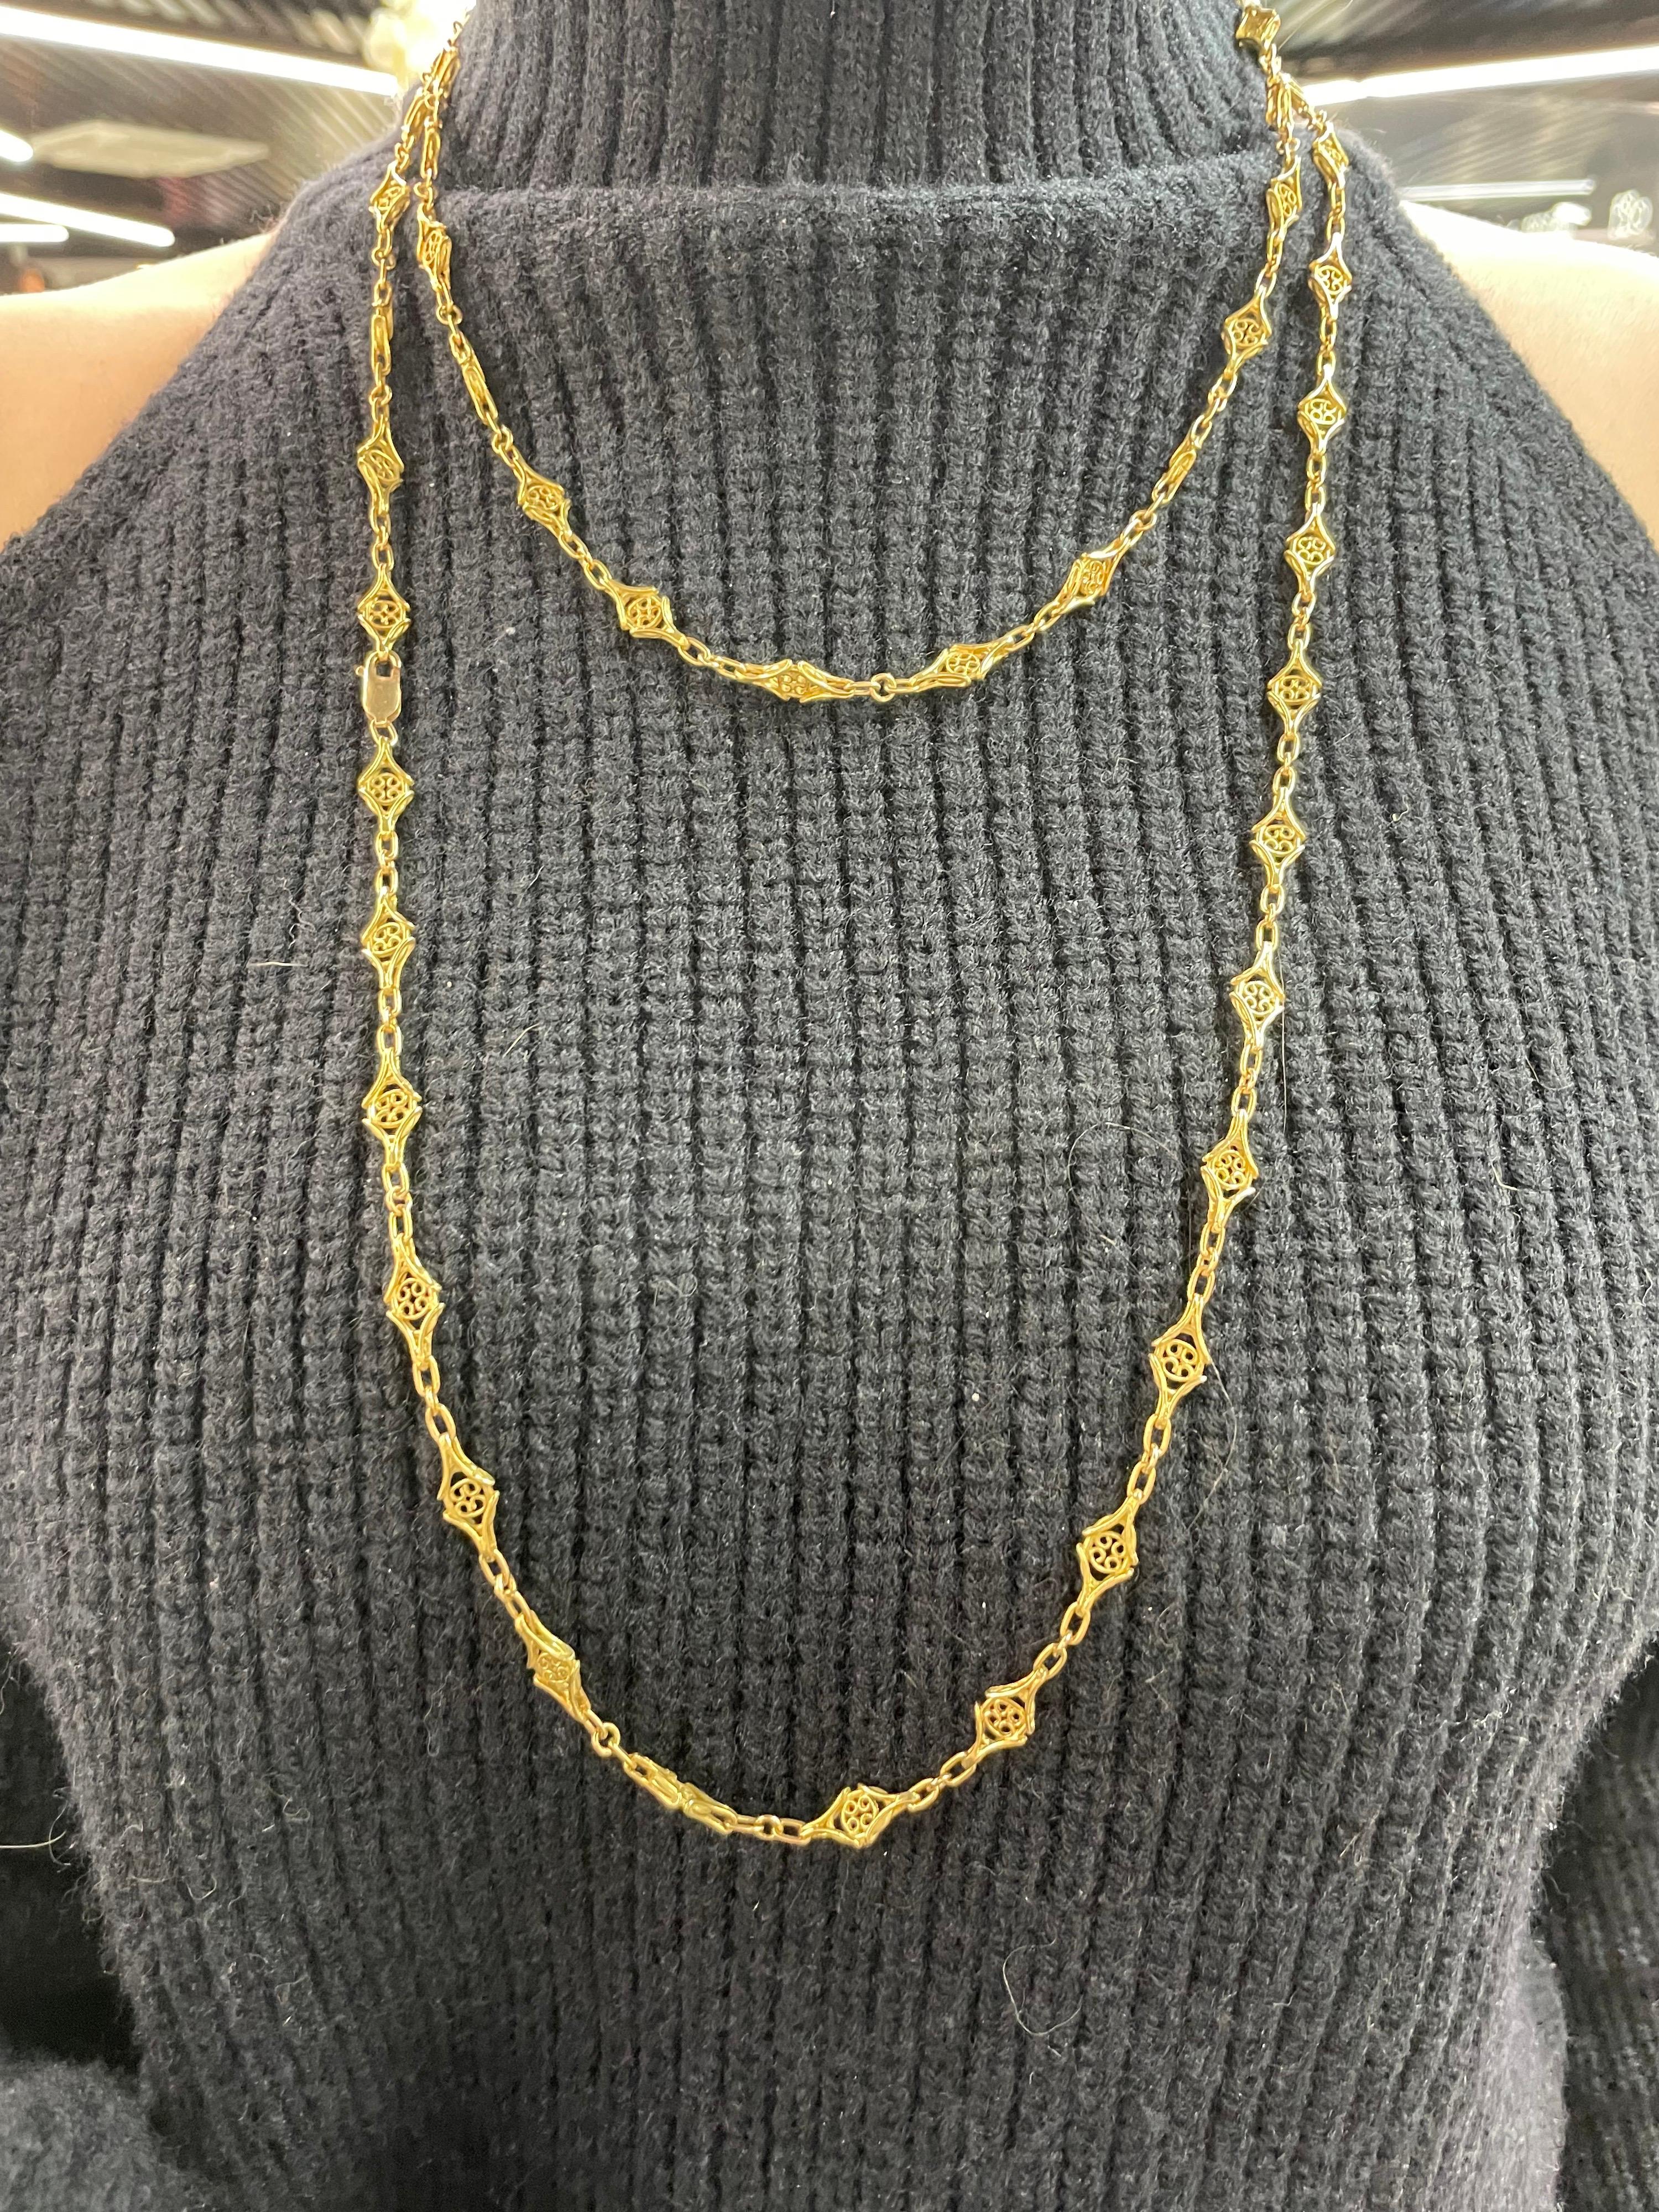 Antique Style Long Link Chain Necklace 18 Karat Yellow Gold Chain 66 Grams 57.5